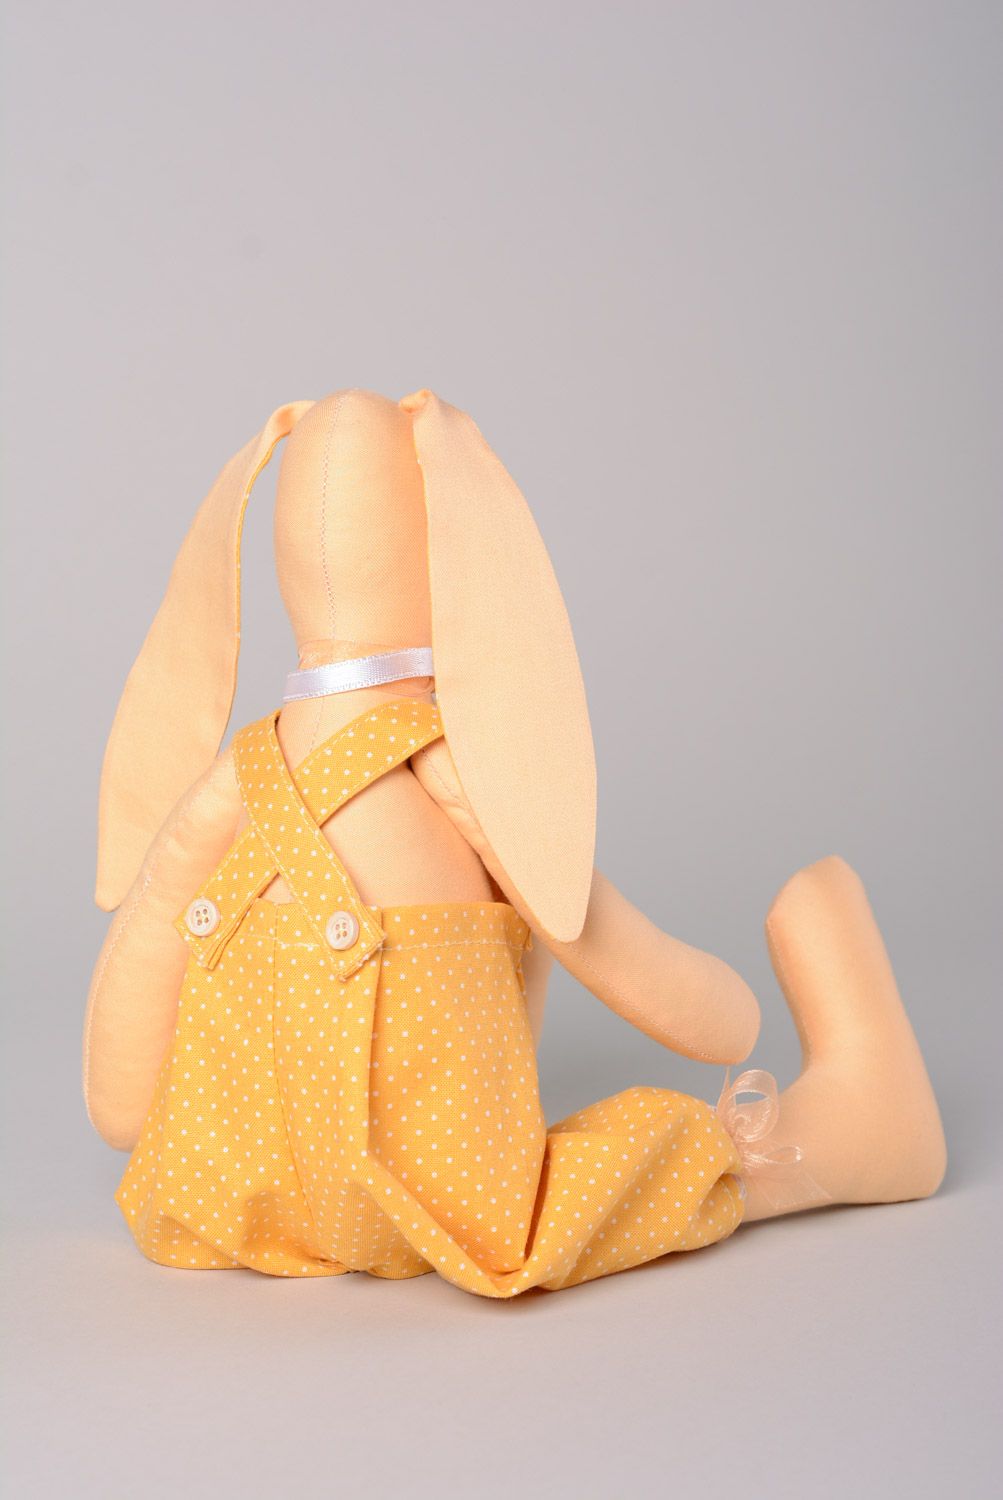 Handmade designer soft toy sewn of natural fabrics in yellow color palette Rabbit photo 5